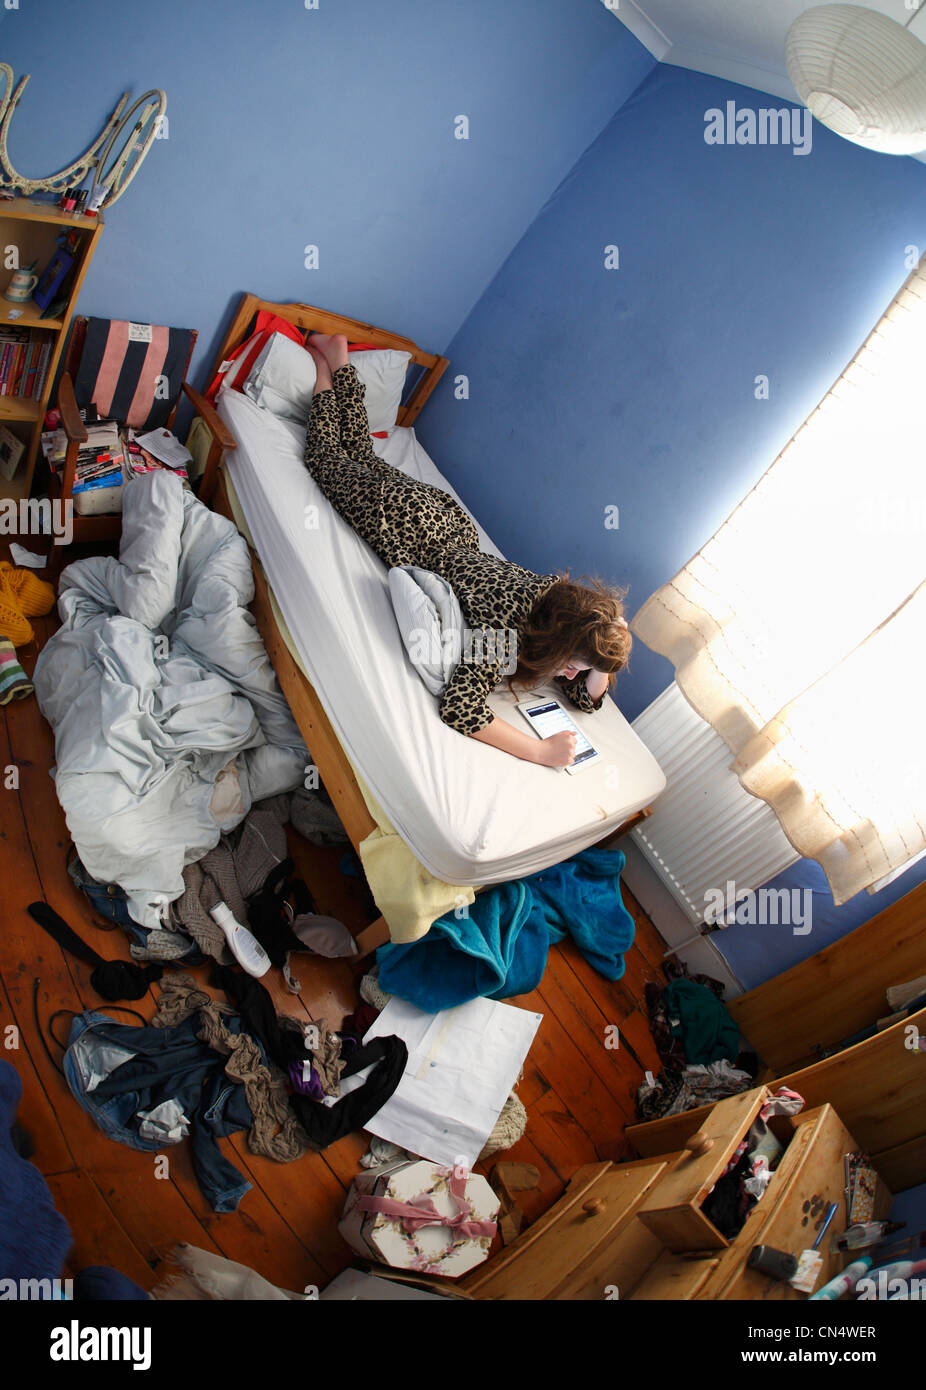 Teenage girl with an ipad on her bed in a messy bedroom. Stock Photo